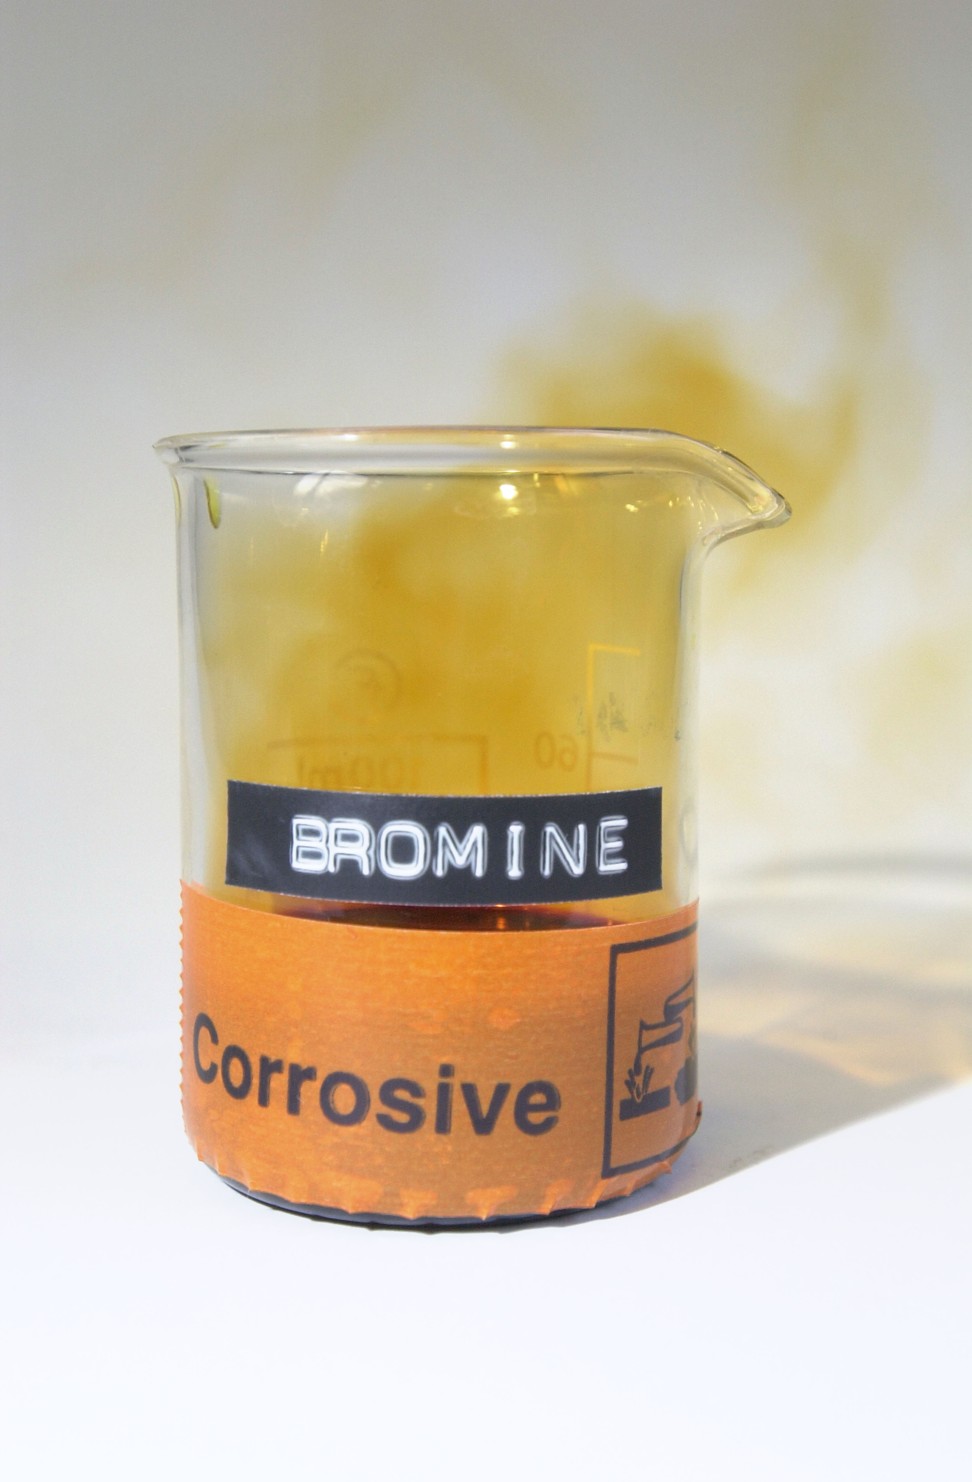 Bromine is used as a flame retardant in materials.